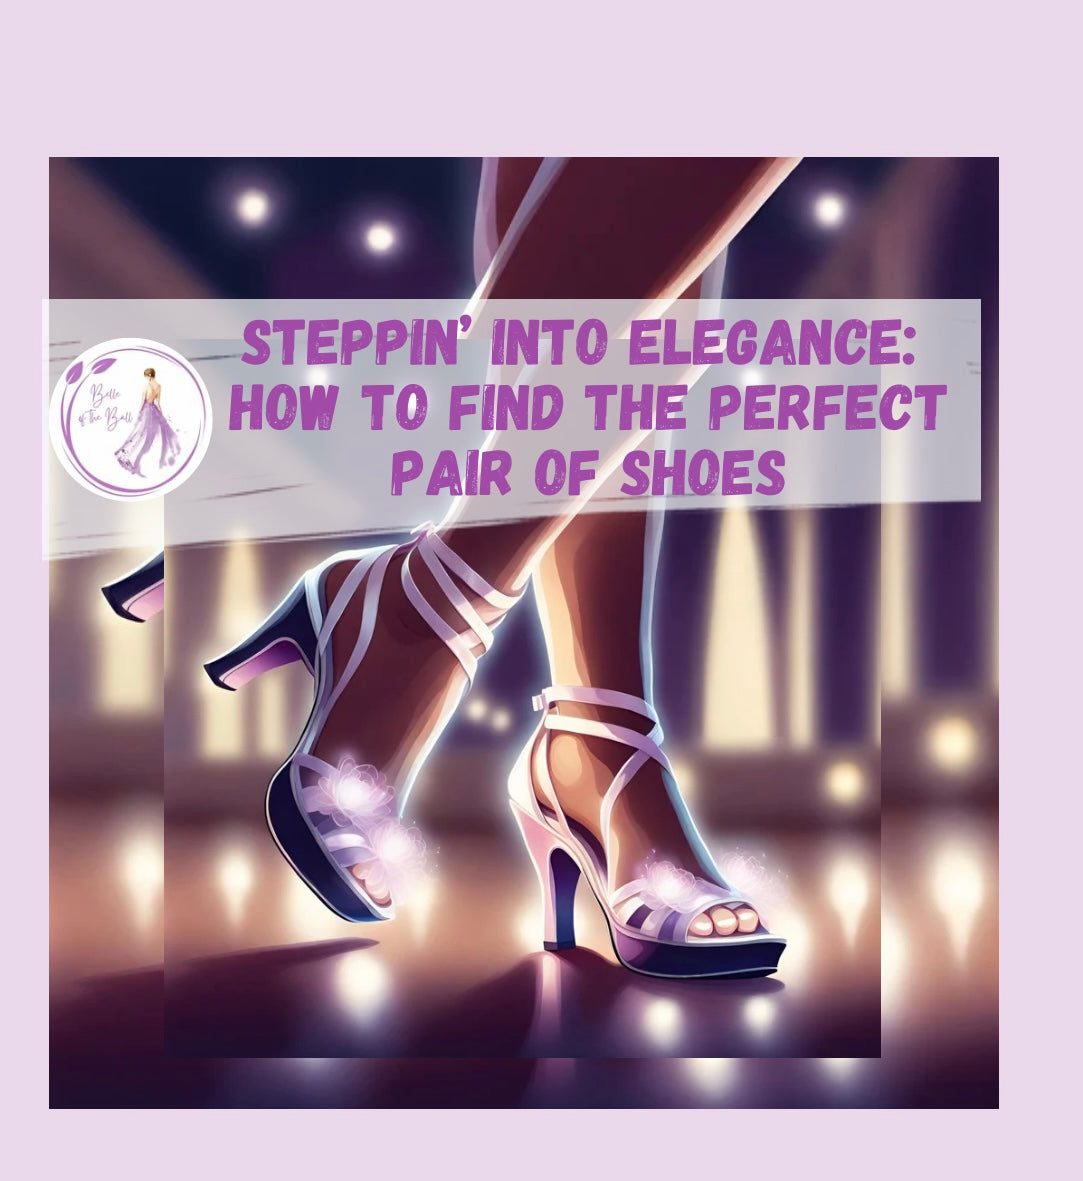 Steppin’ into Elegance: How to Find the Perfect Pair of Shoes!